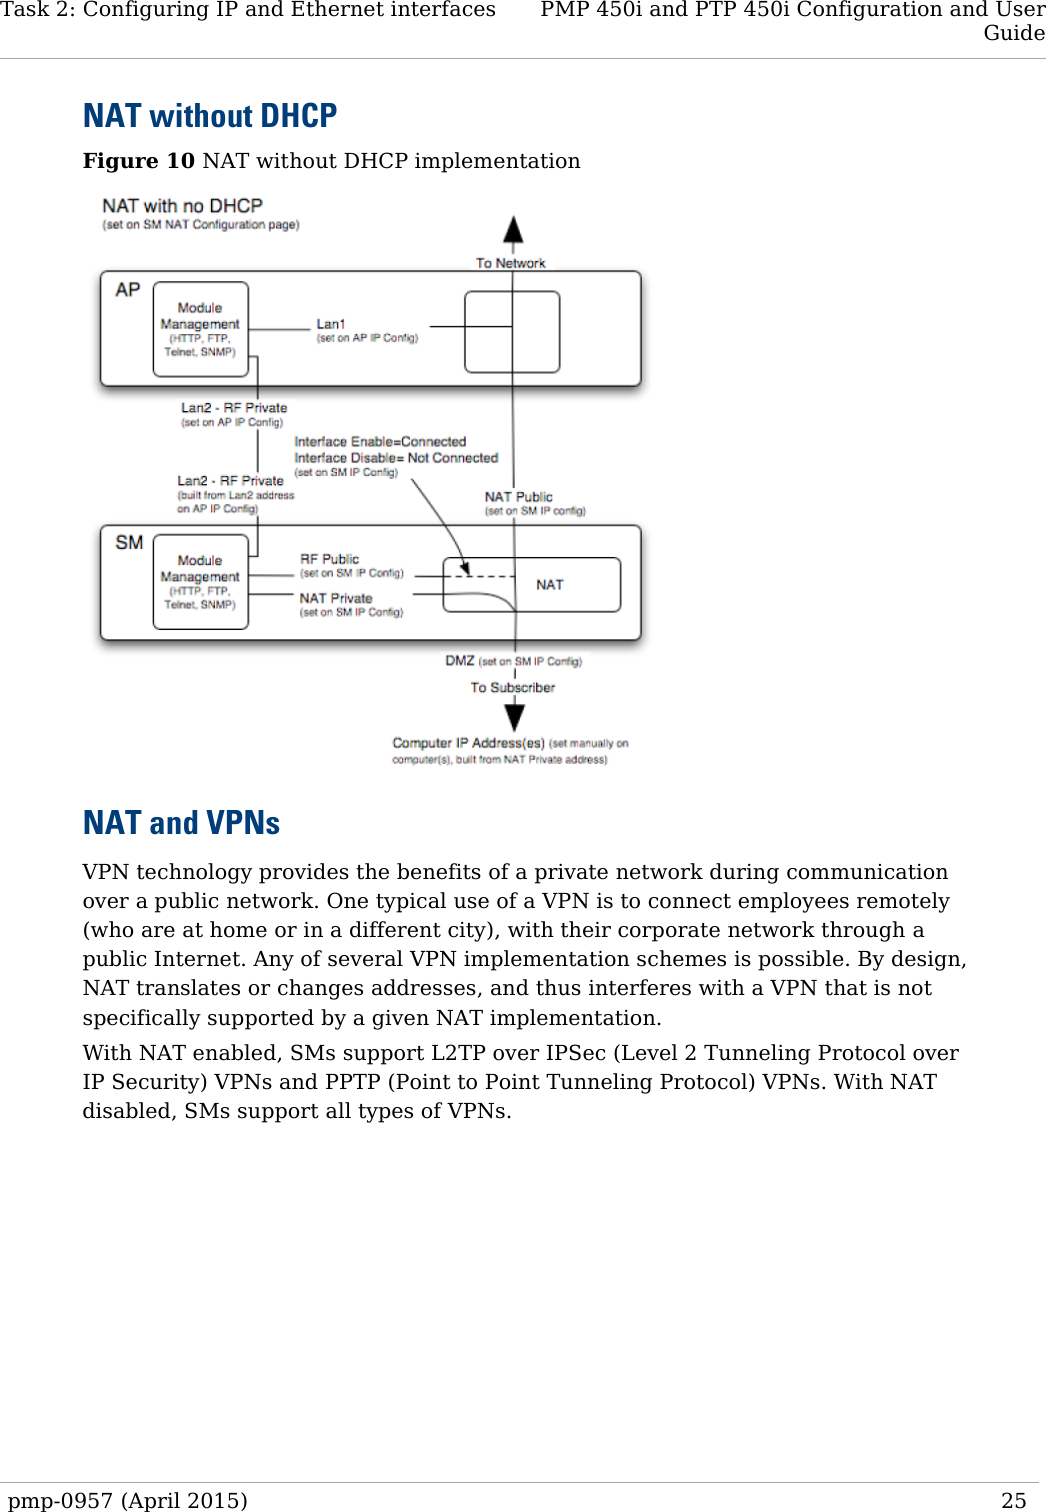 Task 2: Configuring IP and Ethernet interfaces PMP 450i and PTP 450i Configuration and User Guide  NAT without DHCP Figure 10 NAT without DHCP implementation  NAT and VPNs VPN technology provides the benefits of a private network during communication over a public network. One typical use of a VPN is to connect employees remotely (who are at home or in a different city), with their corporate network through a public Internet. Any of several VPN implementation schemes is possible. By design, NAT translates or changes addresses, and thus interferes with a VPN that is not specifically supported by a given NAT implementation. With NAT enabled, SMs support L2TP over IPSec (Level 2 Tunneling Protocol over IP Security) VPNs and PPTP (Point to Point Tunneling Protocol) VPNs. With NAT disabled, SMs support all types of VPNs.  pmp-0957 (April 2015)   25  